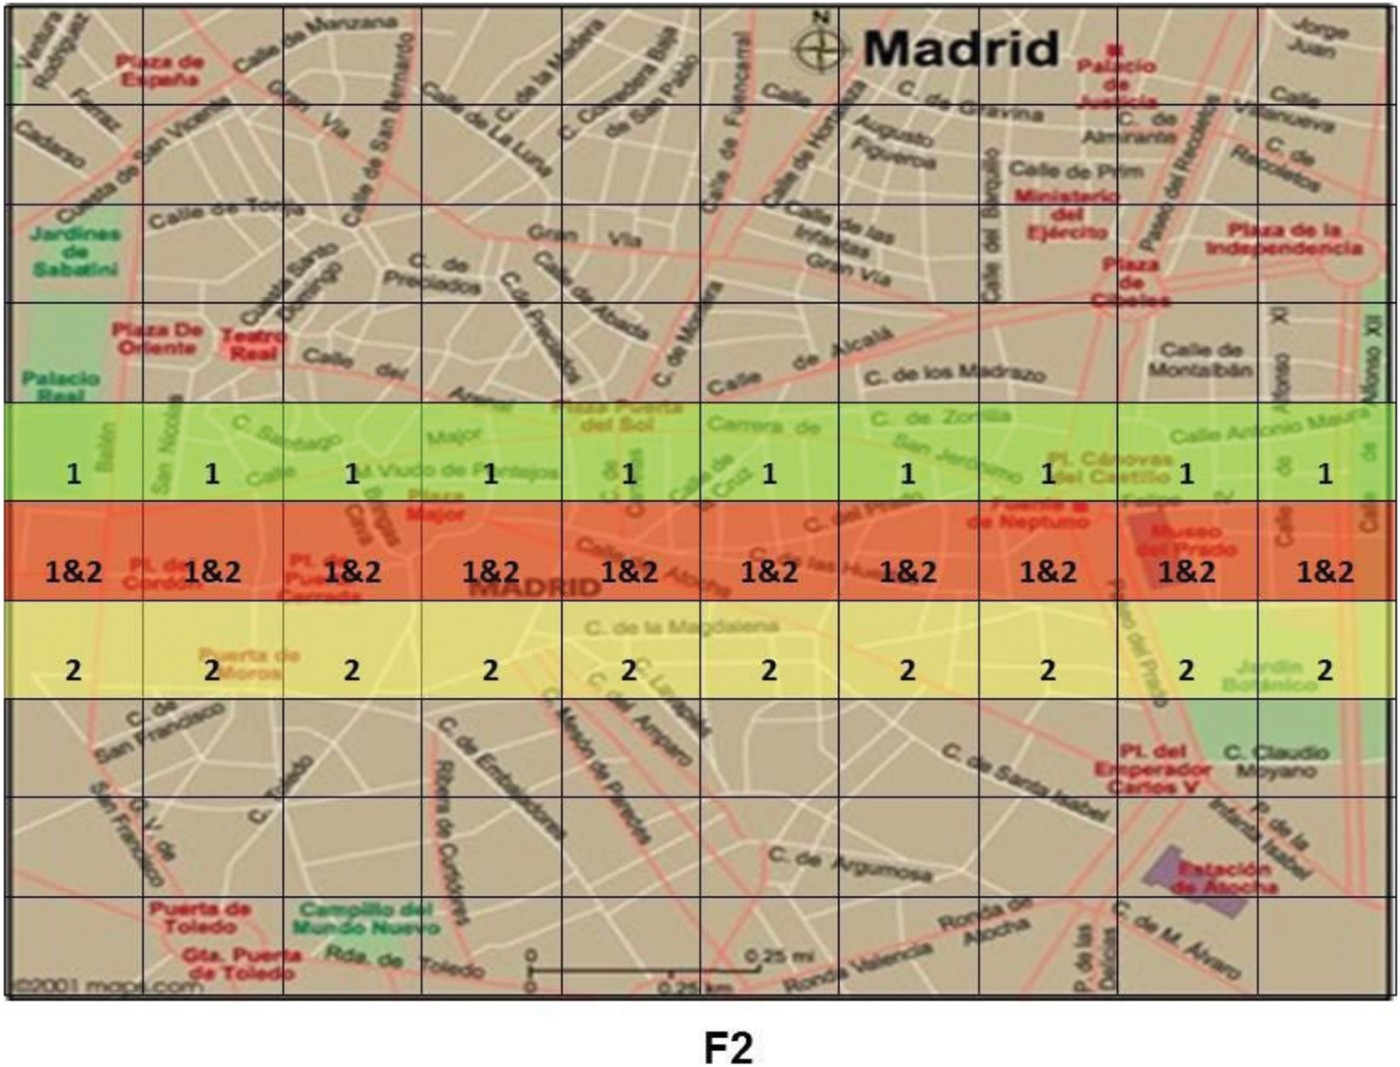 Example of the kinds of maps seen by participants in Harris and Hahn's (2009) study. Shaded areas labelled ‘1’ indicate areas identified by the first of the two witnesses as a putative location of the missing body. Areas labelled ‘2’ are parts of the city identified as a possible location only by the second witness. Areas labelled ‘1&2’ represent regions of overlap between the two testimonies.